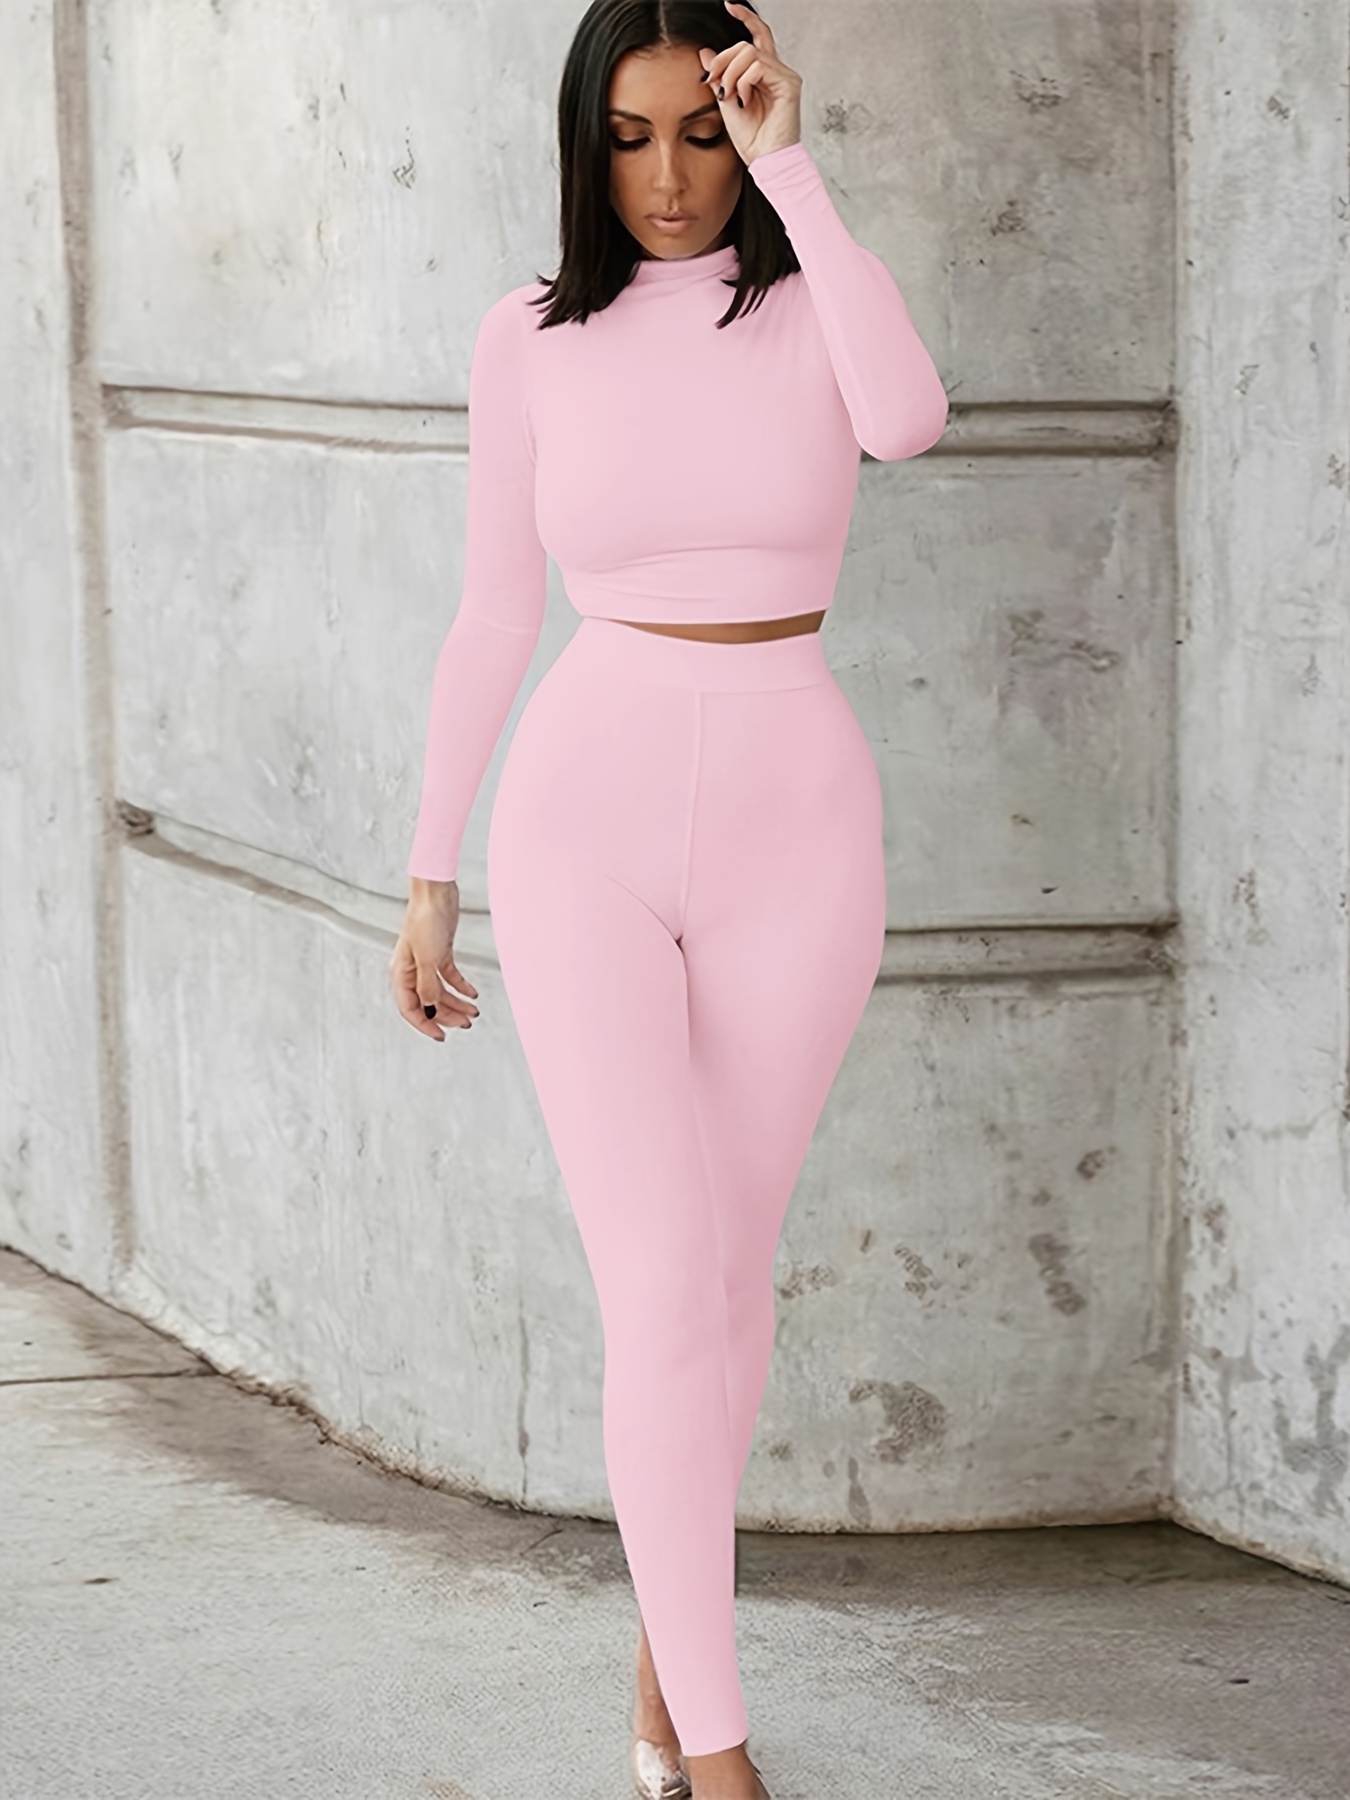 5Sets Bulk Items Wholesale Women Two Piece Sets Solid Color Split Tops +  Stretchy Leggings Outfits Ladies Casual Tracksuits 8279 - AliExpress